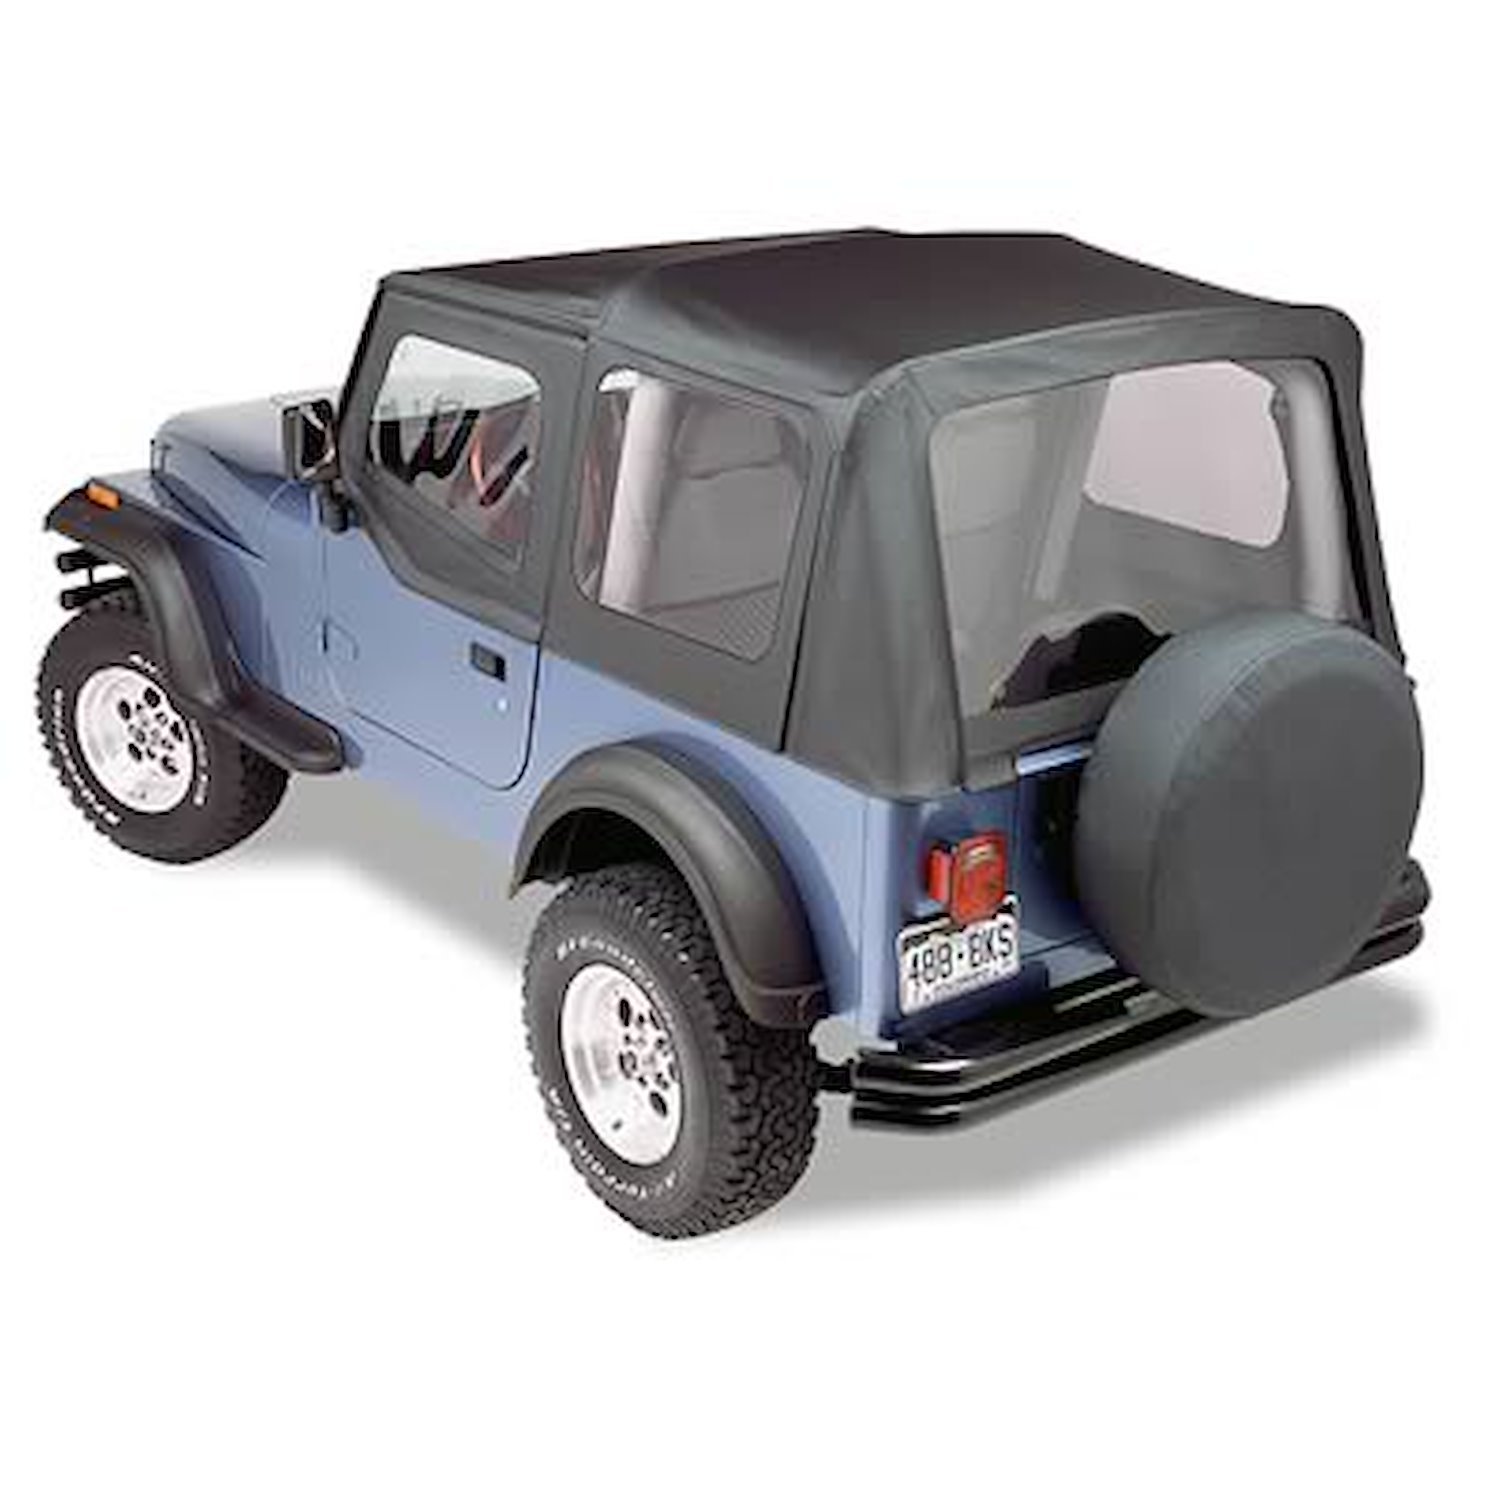 Replace-A-Top, Black, Clear Windows, Upper Door Skins Included,